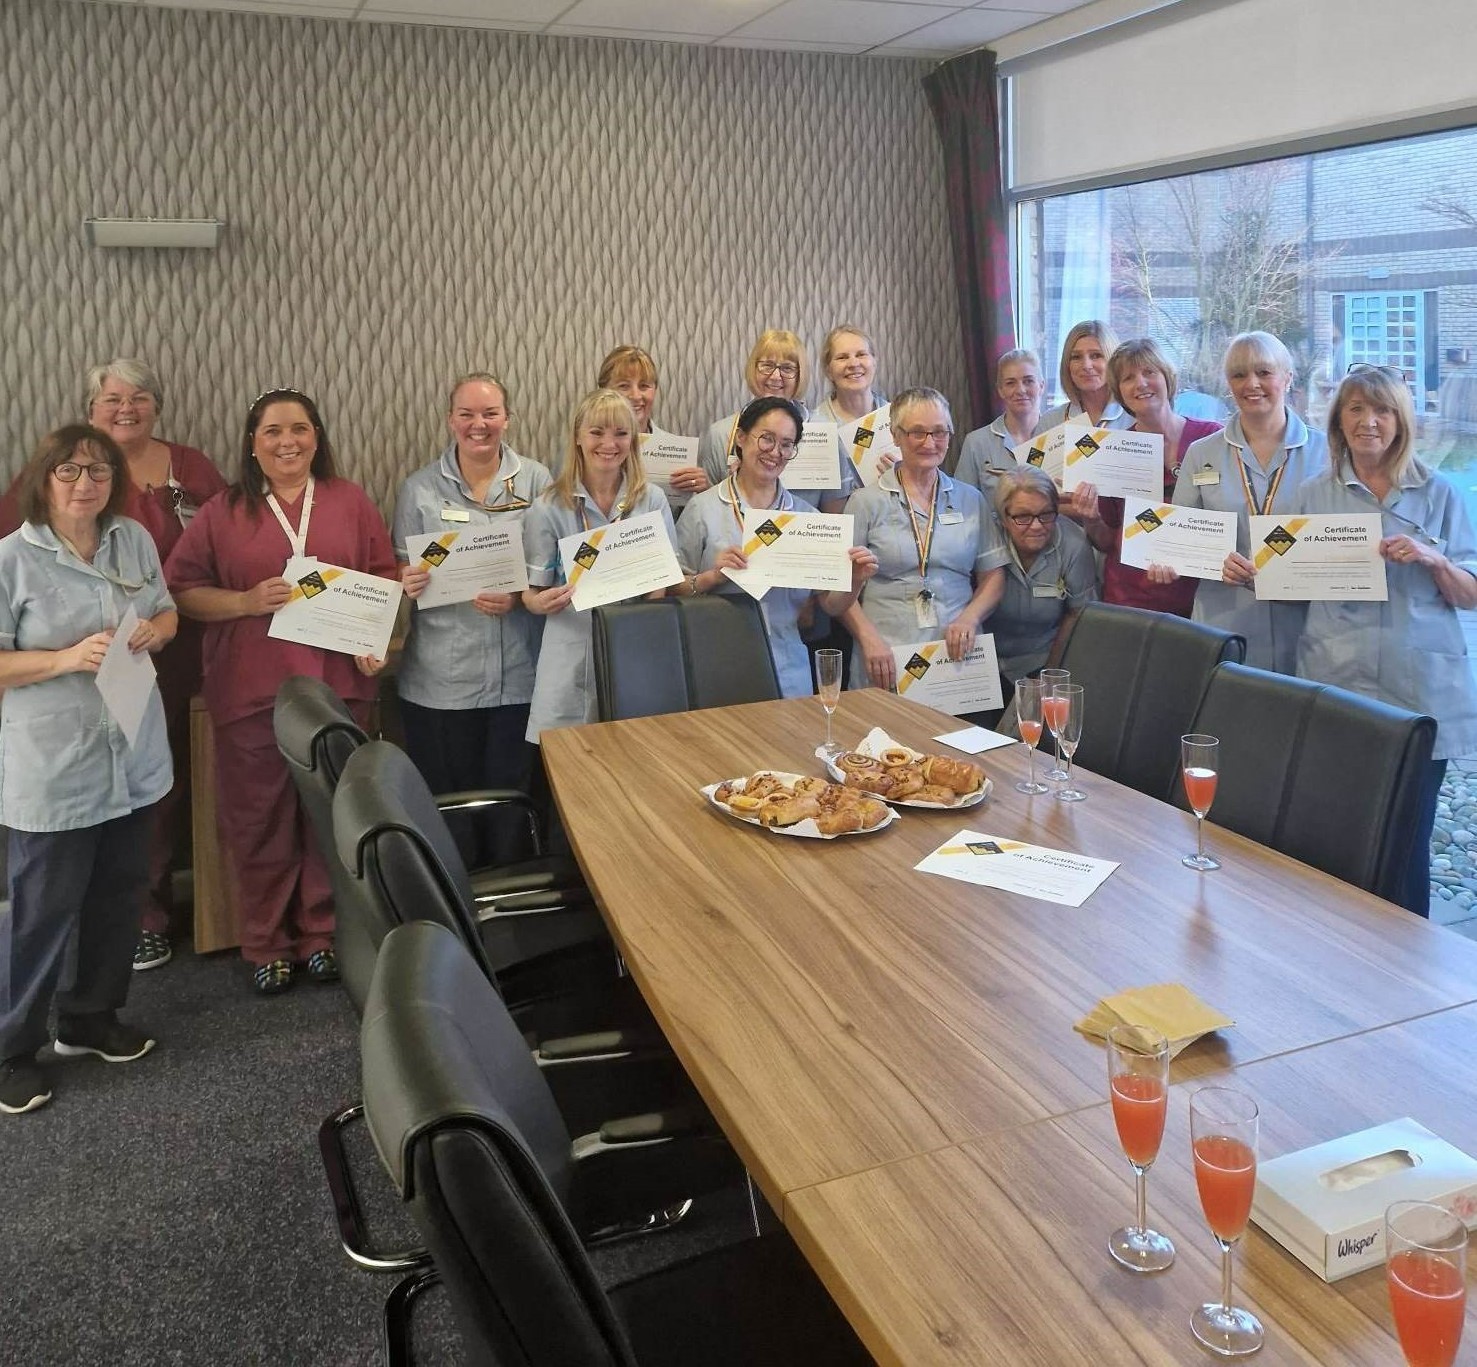 Gold Cap Award for Housekeeping at Spire Cheshire Hospital